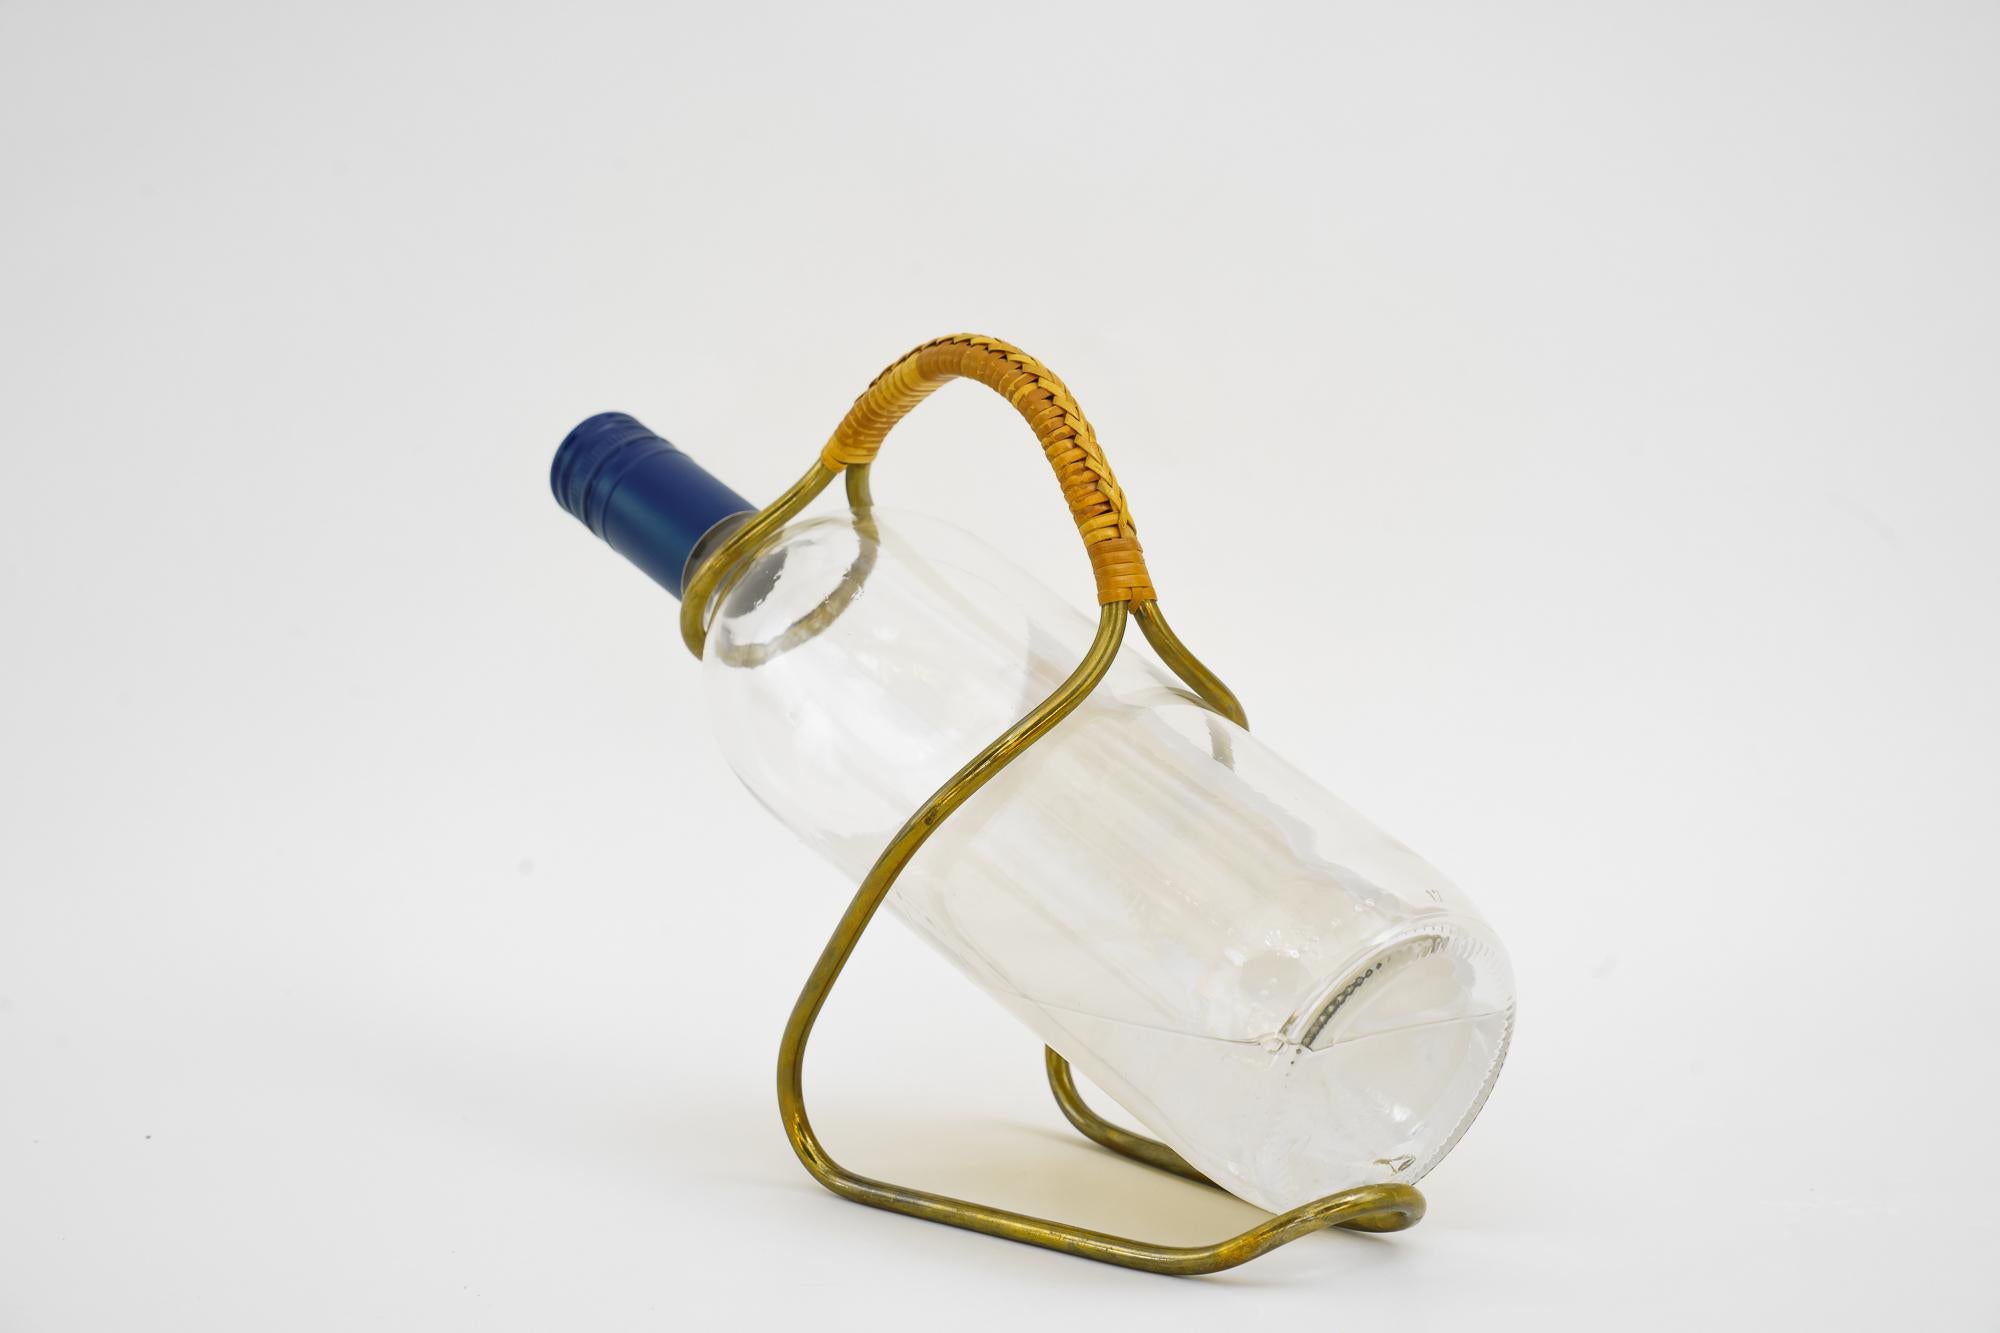 Bottle holder by Auböck around 1950s
Original condition
The wine bottle is not included, it is only for the photo shooting.